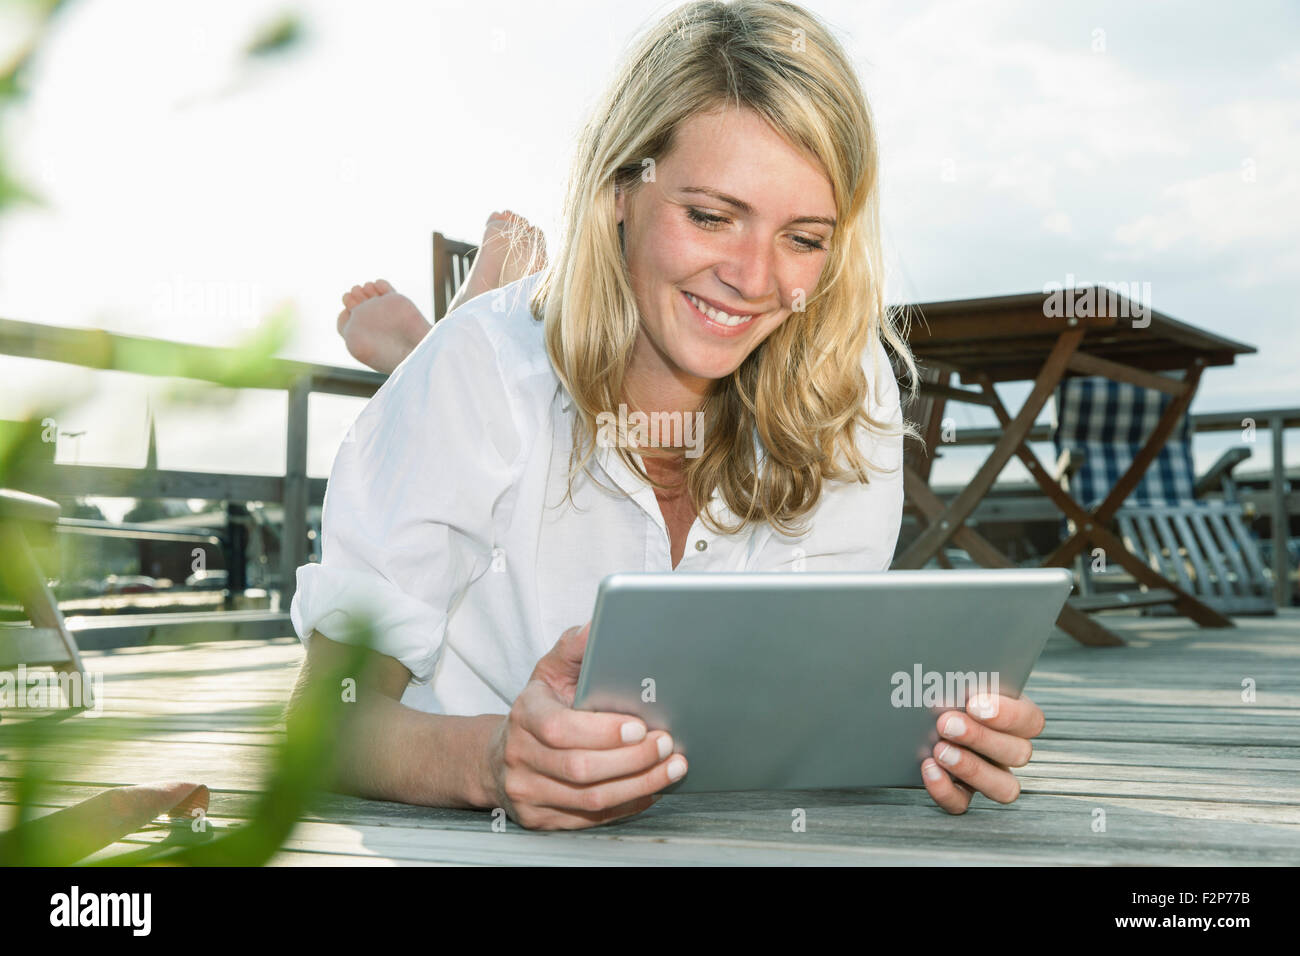 Smiling young woman relaxing on deck using digital tablet Stock Photo